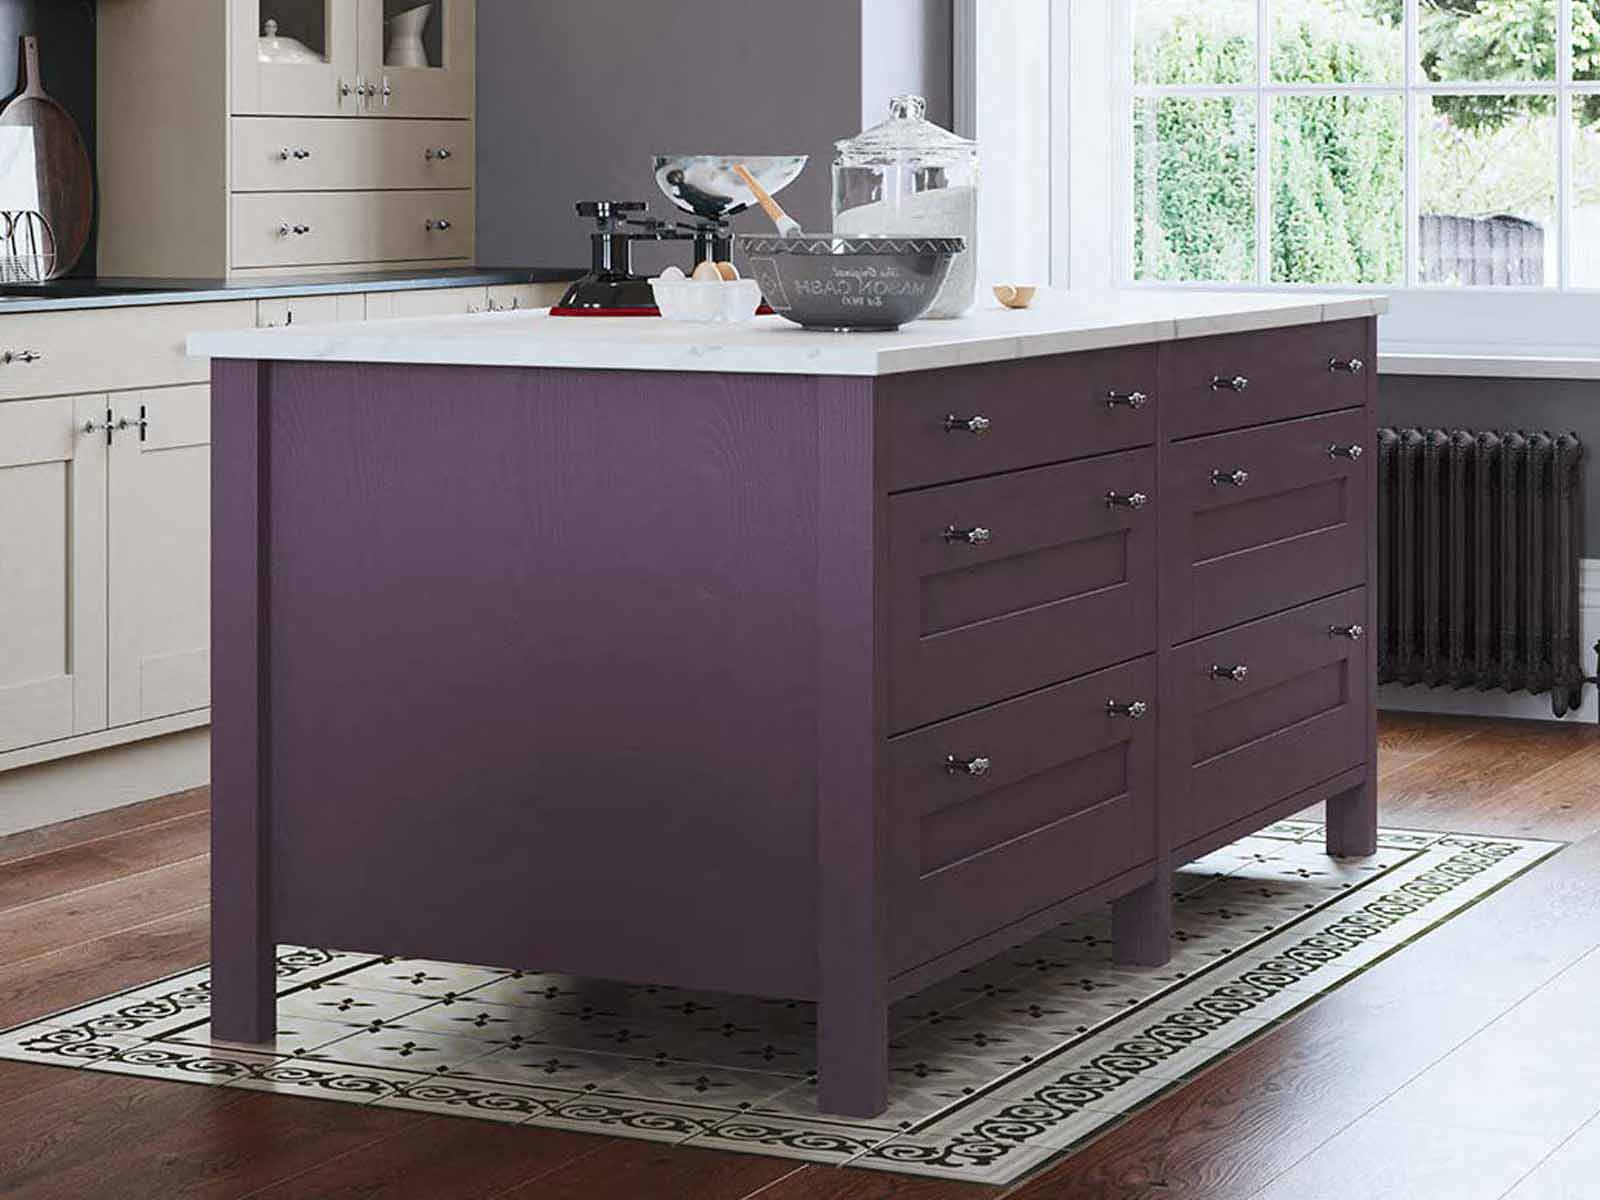 A mulberry Sherborne purple kitchen island with a while marble worktop